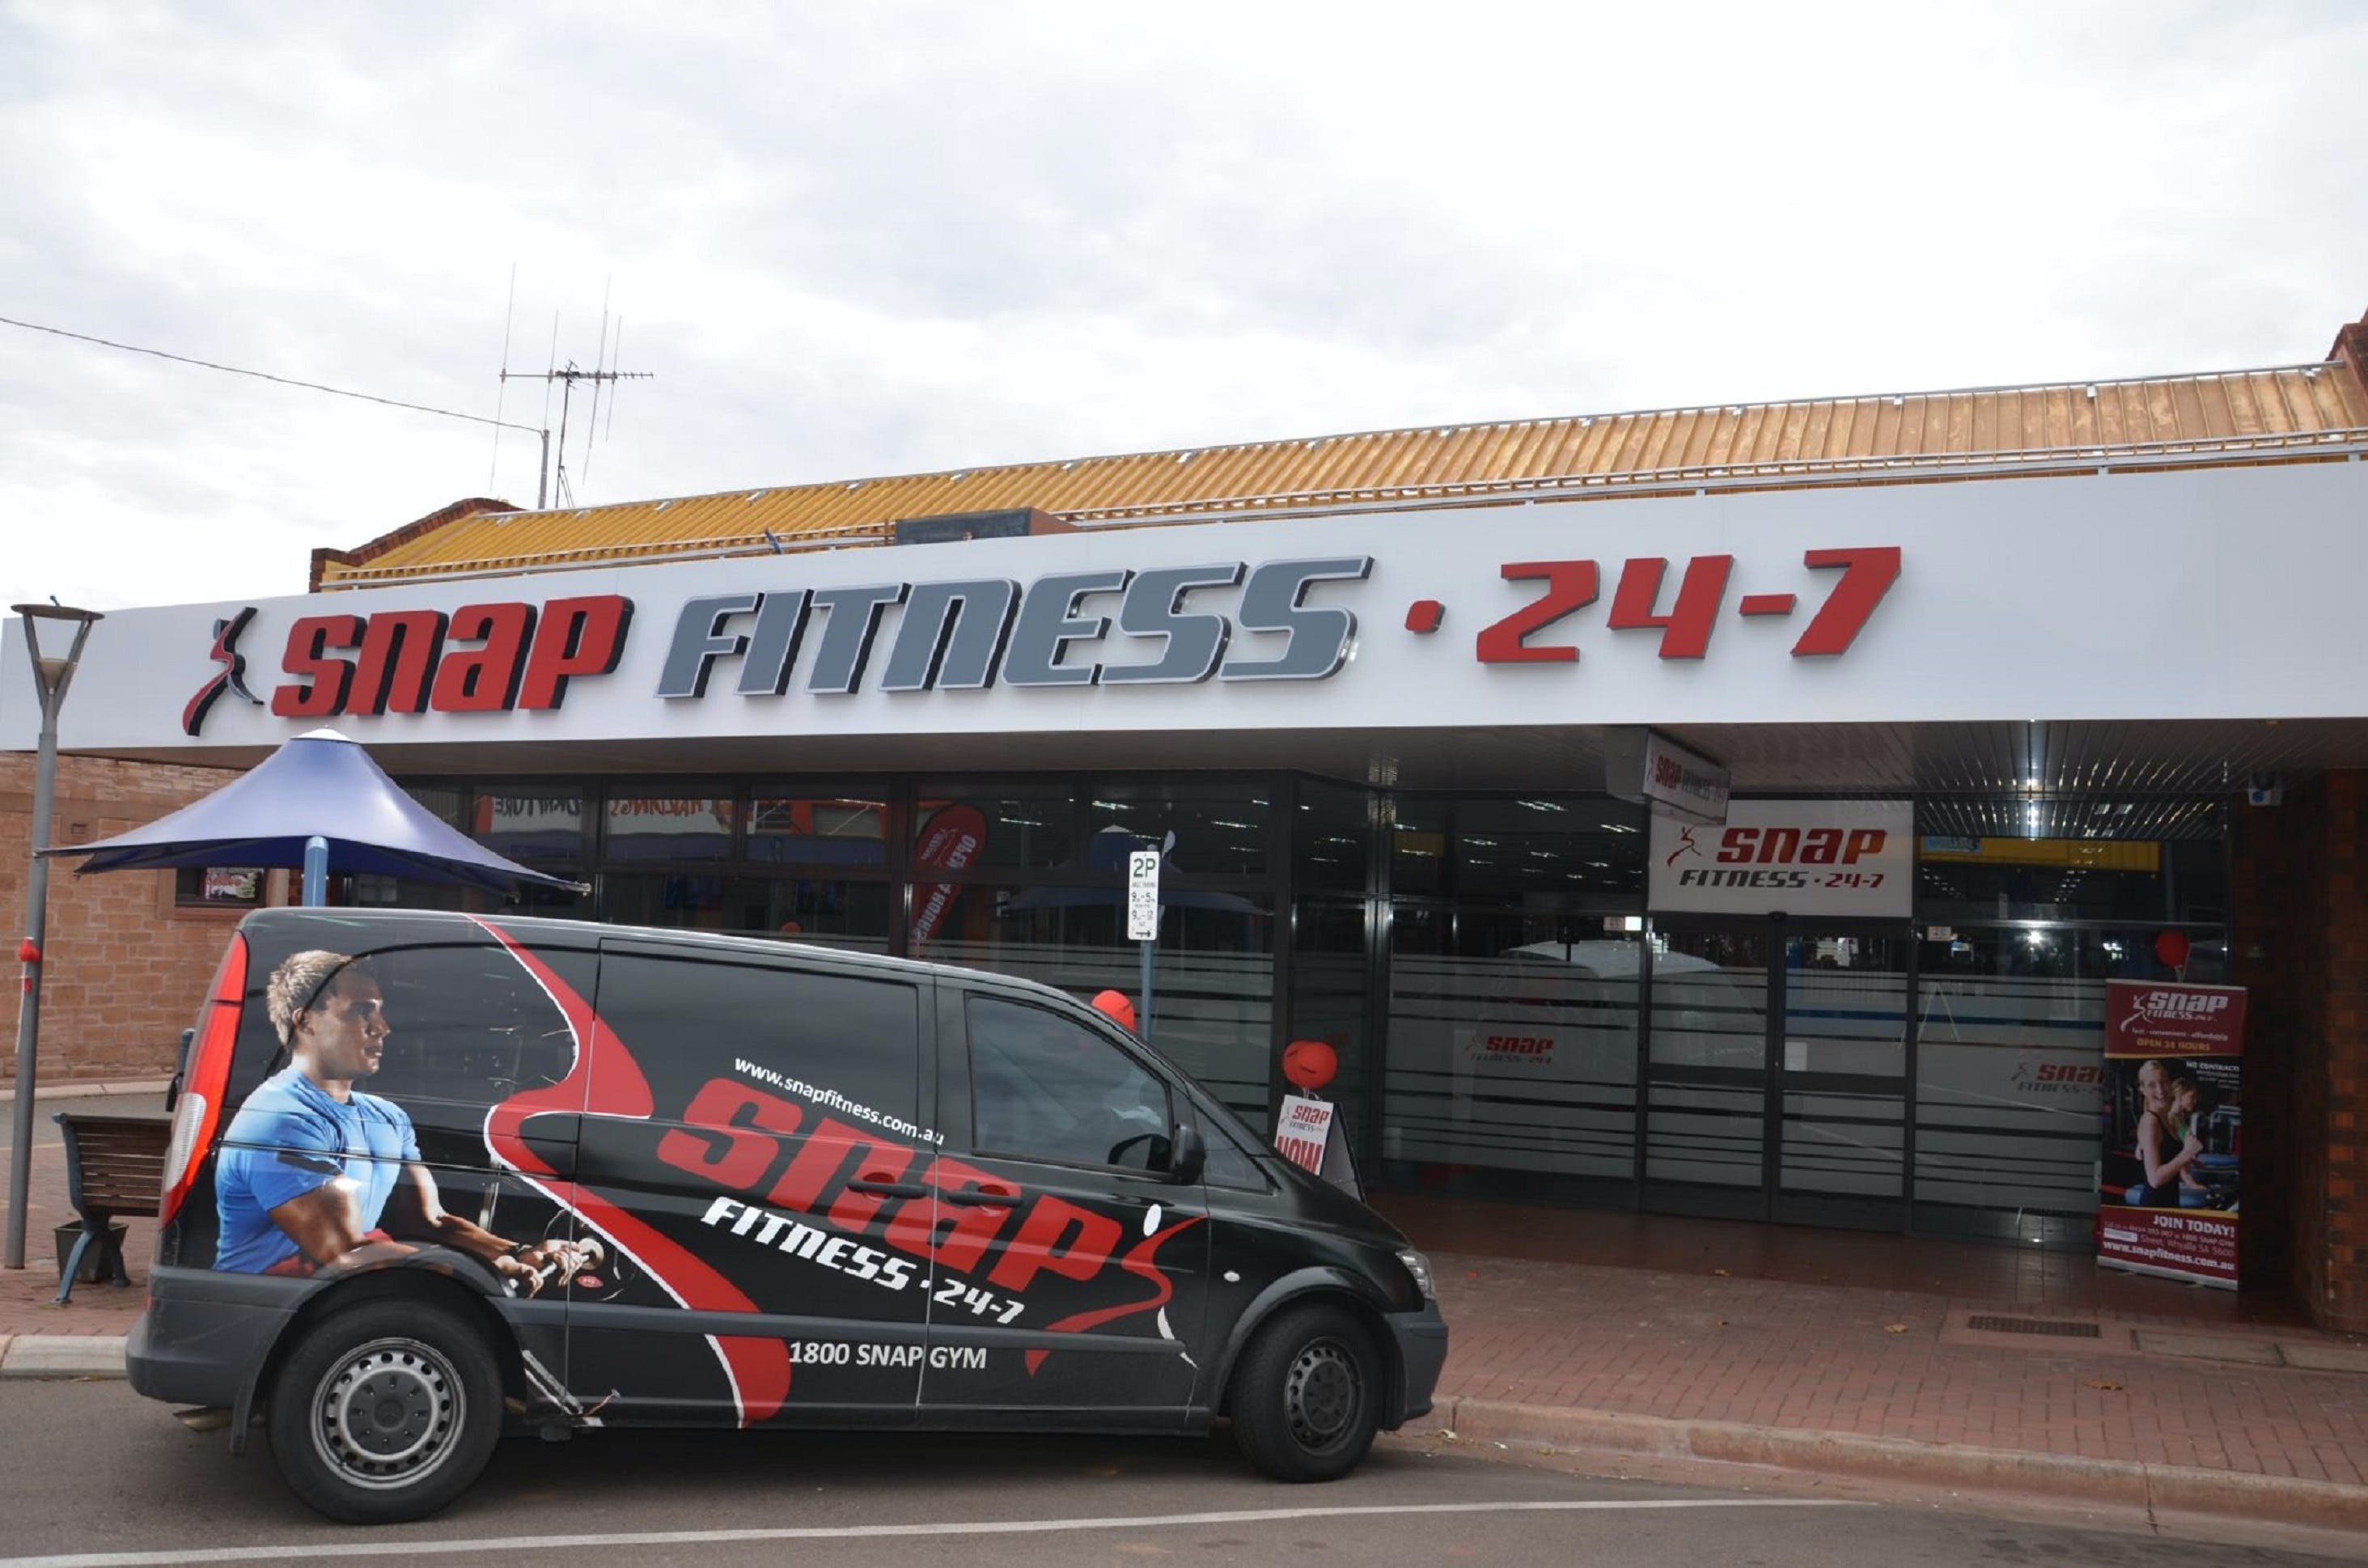 Snap Fitness Whyalla 24/7 gym - Find Attractions